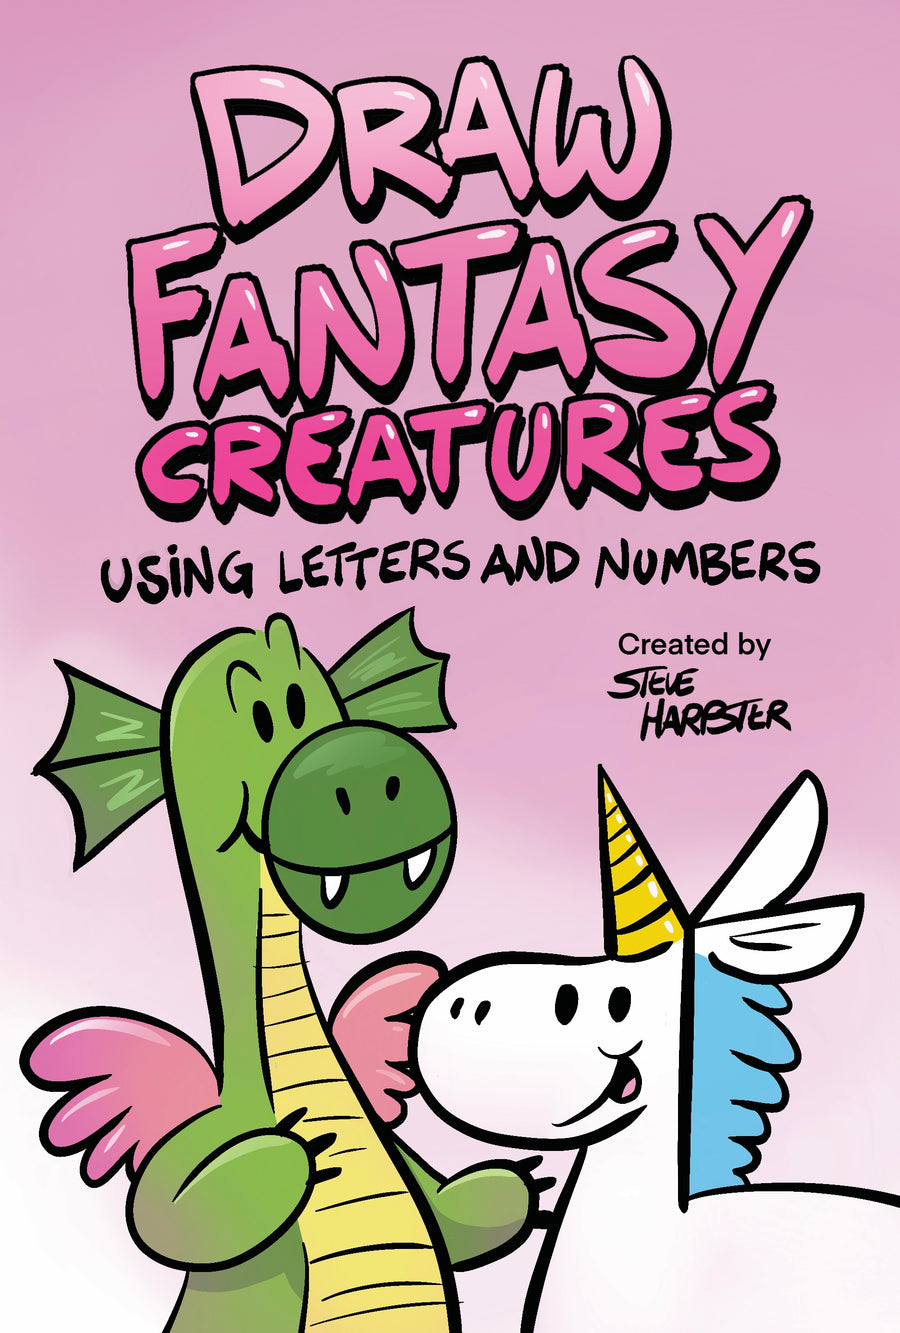 Have a BLAST turning numbers and letters into your favorite fantasy creatures.